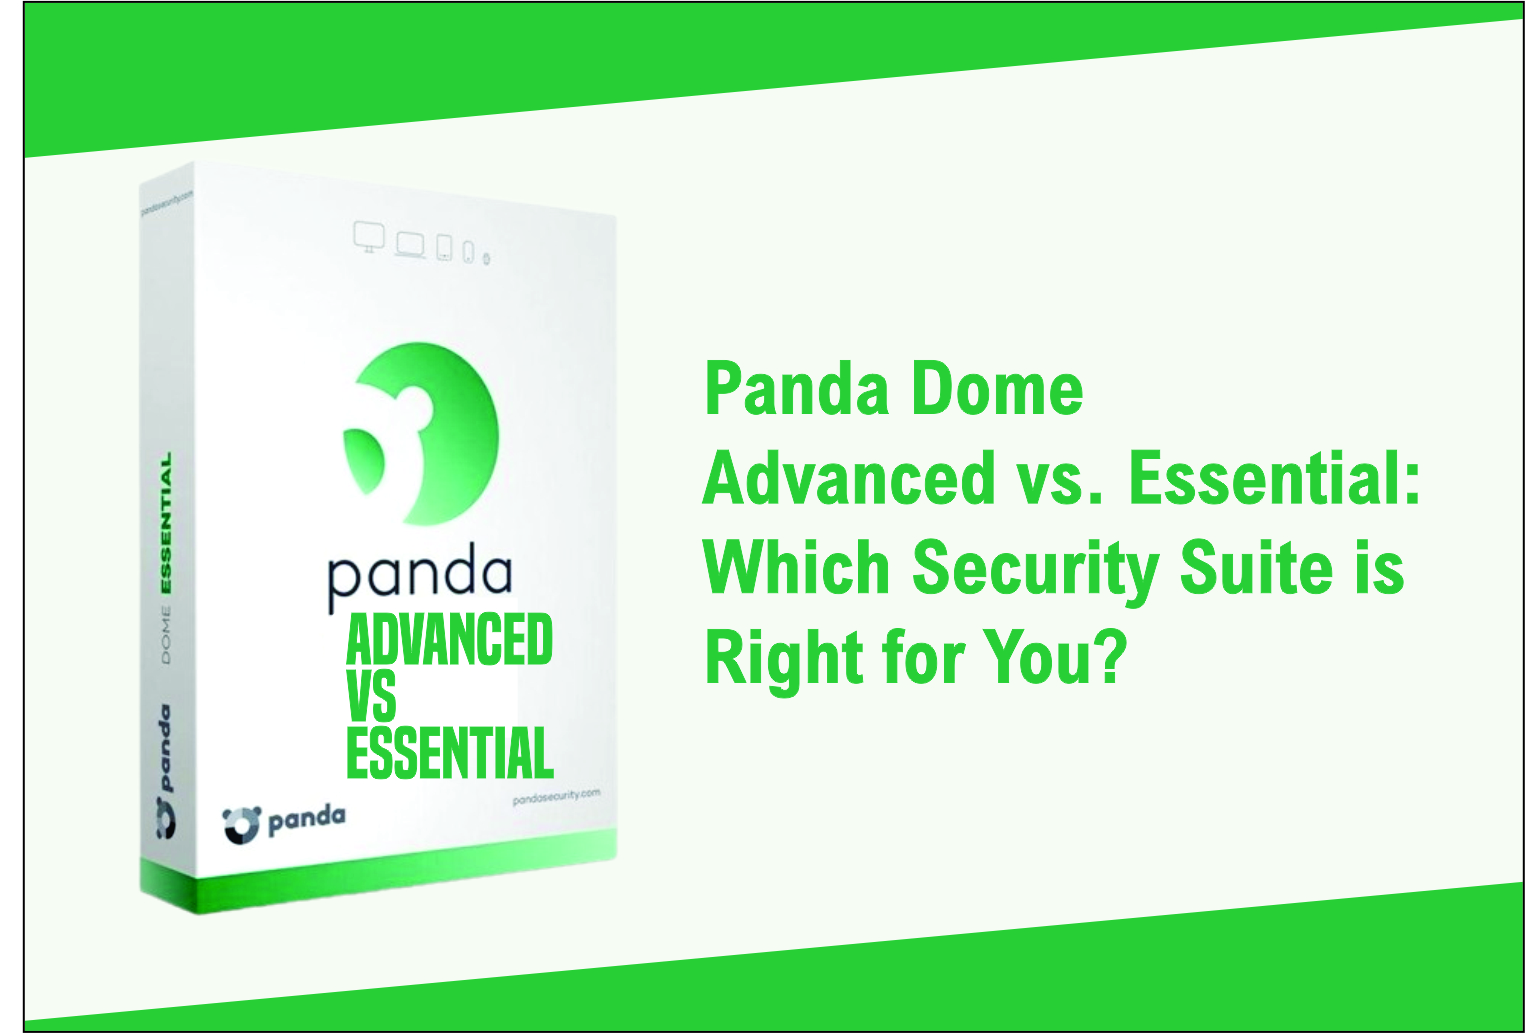 Panda Dome Advanced vs. Essential: Which Security Suite is Right for You?